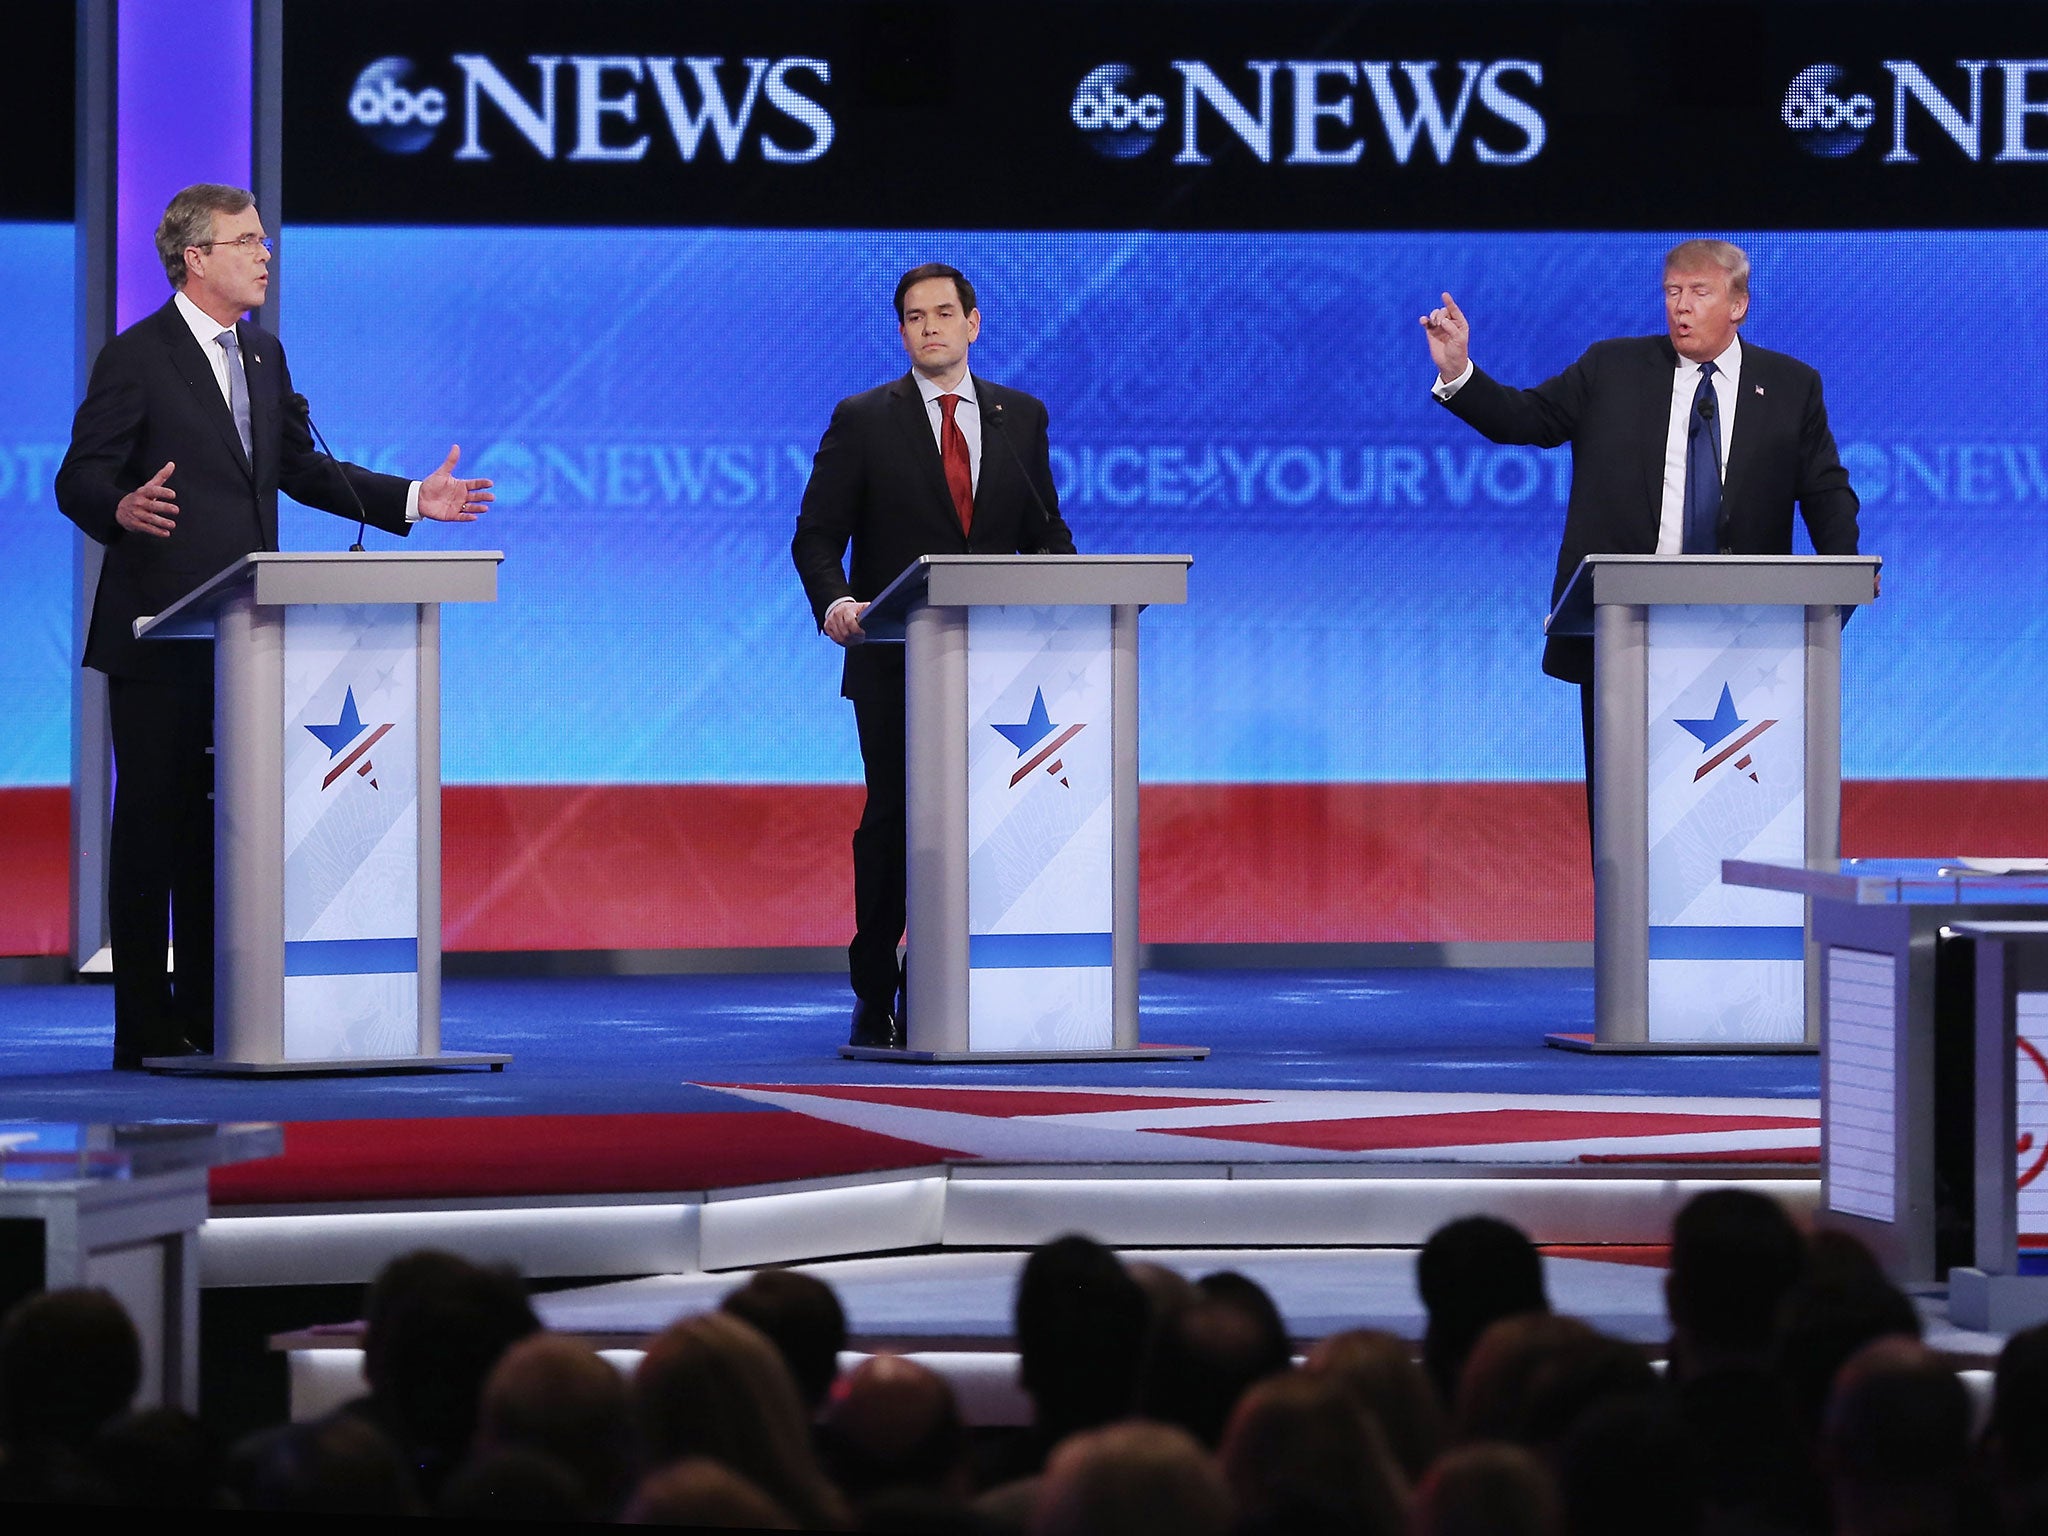 Republican presidential contenders, from left, Jeb Bush, Marco Rubio and Donald Trump in the televised debate